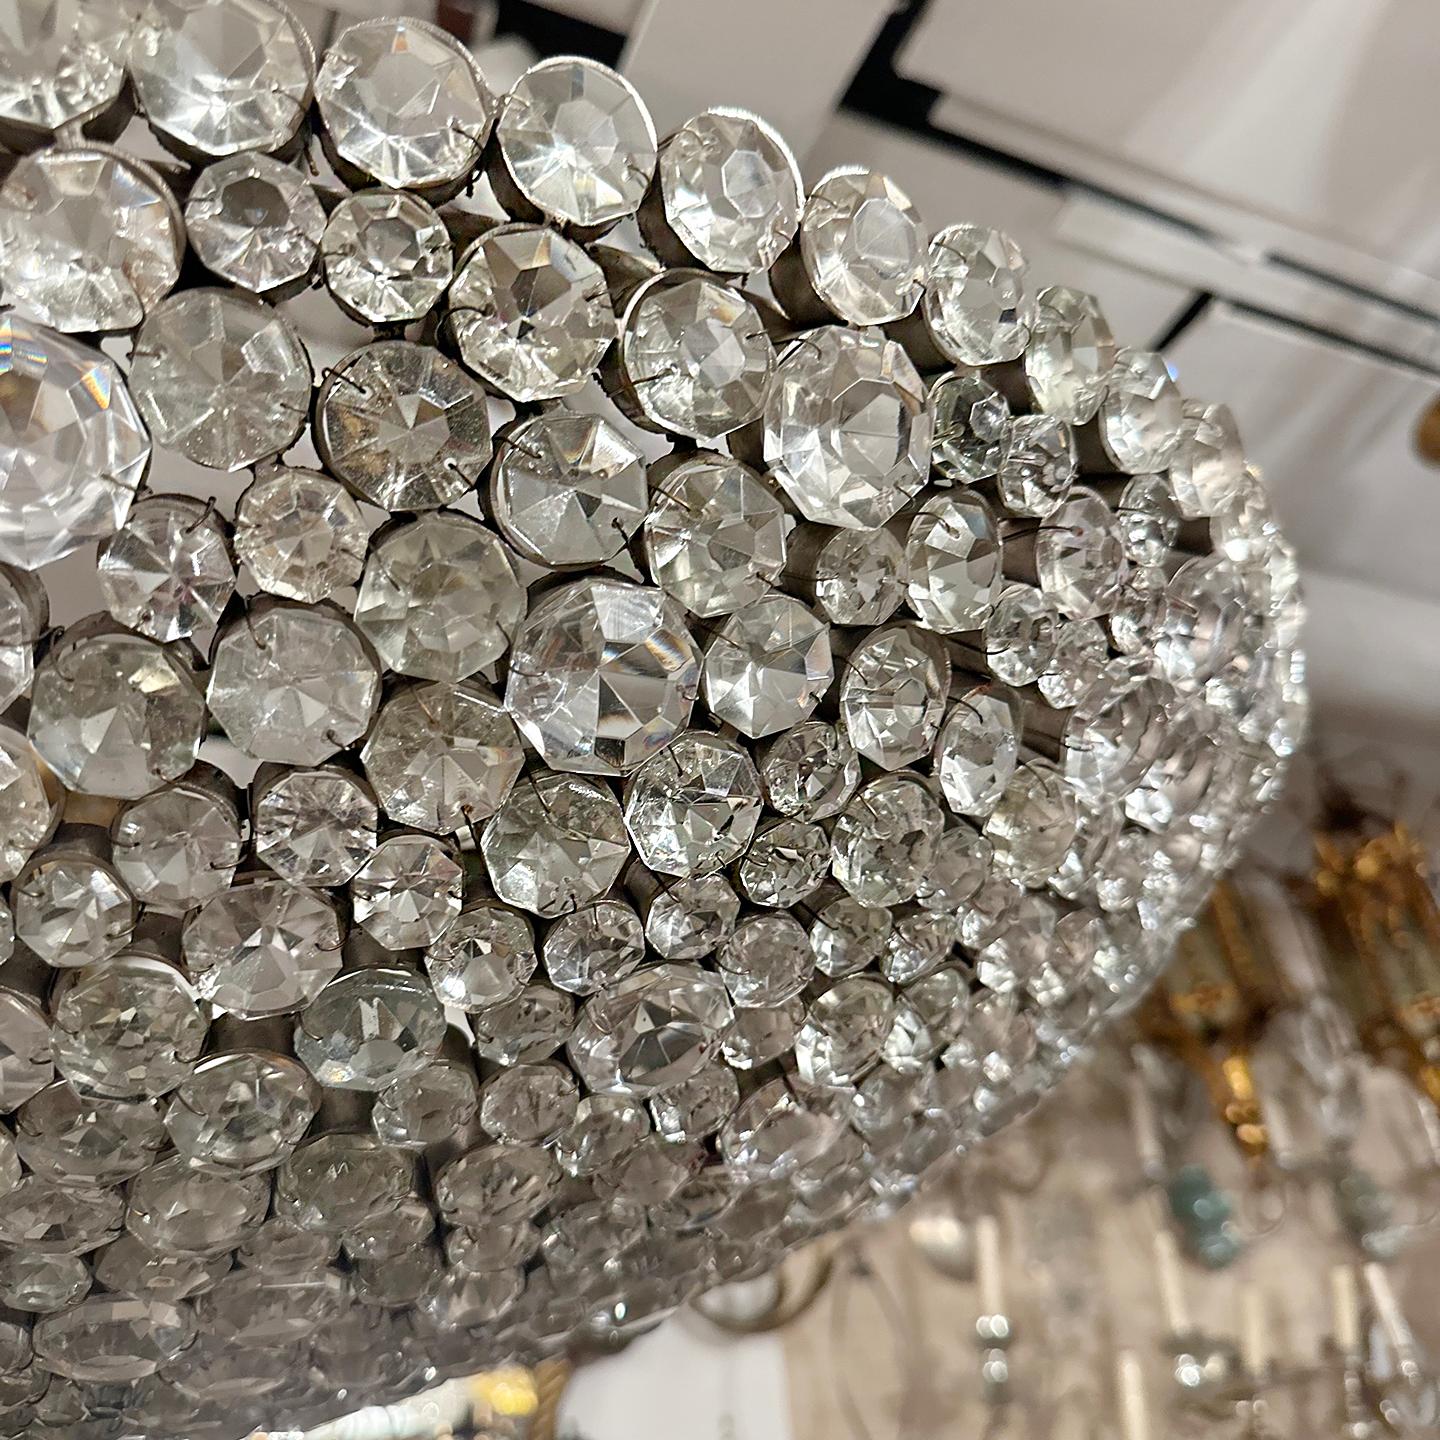 Circa 1960's French oval nickel plated light fixture with crystal insets on the body. 8 Edison interior lights.

Measurements:
Present drop: 24.5